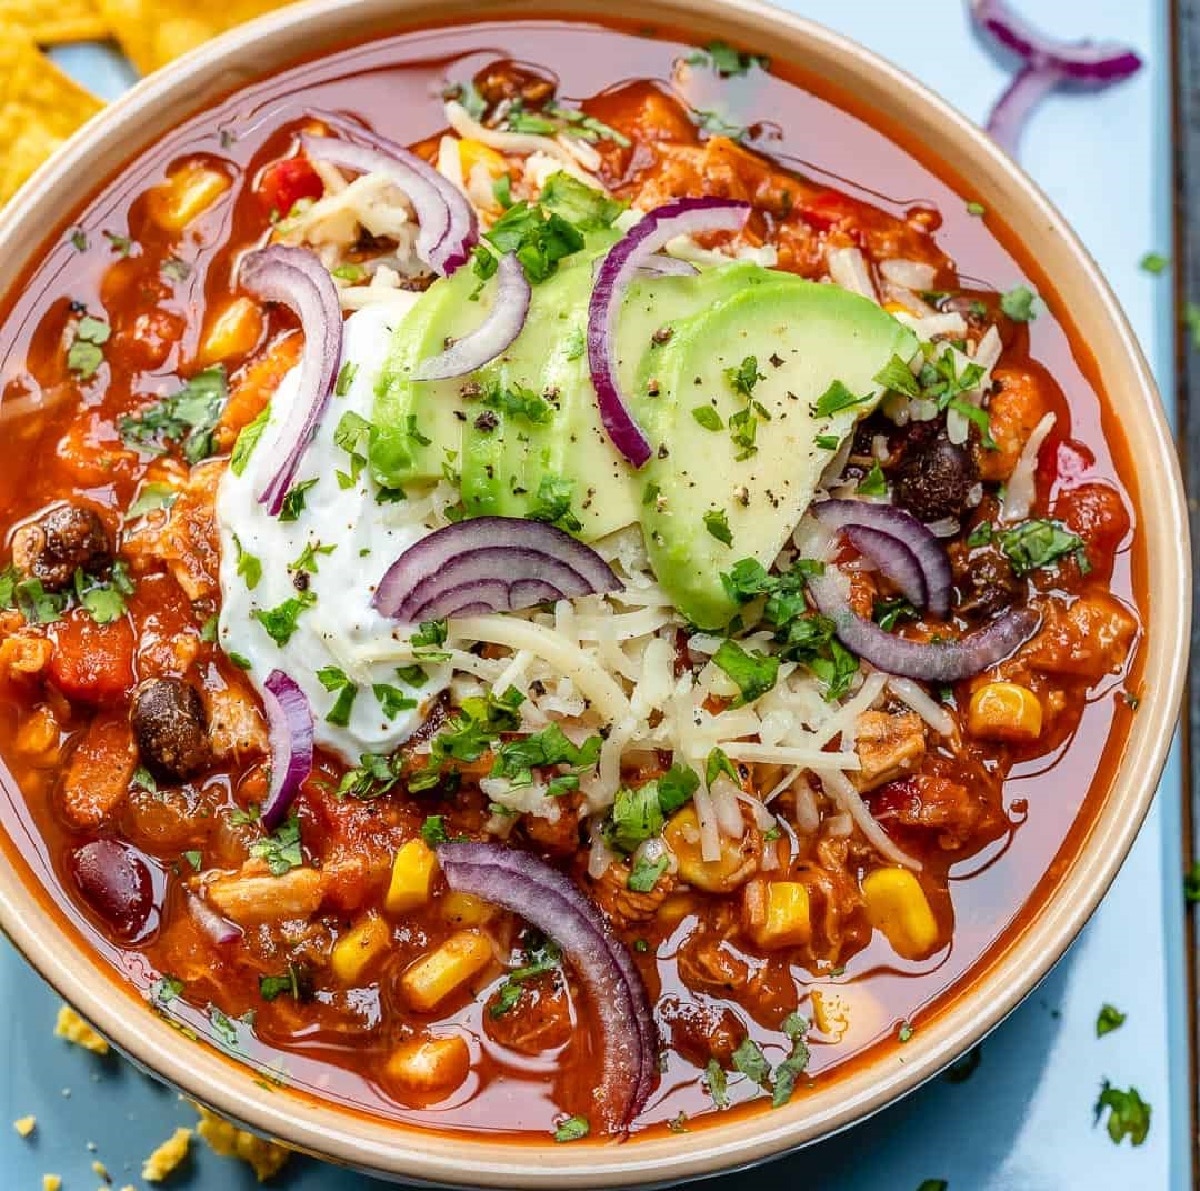 Chicken Chili topped with sour cream, red onions, avocado, and dried oregano